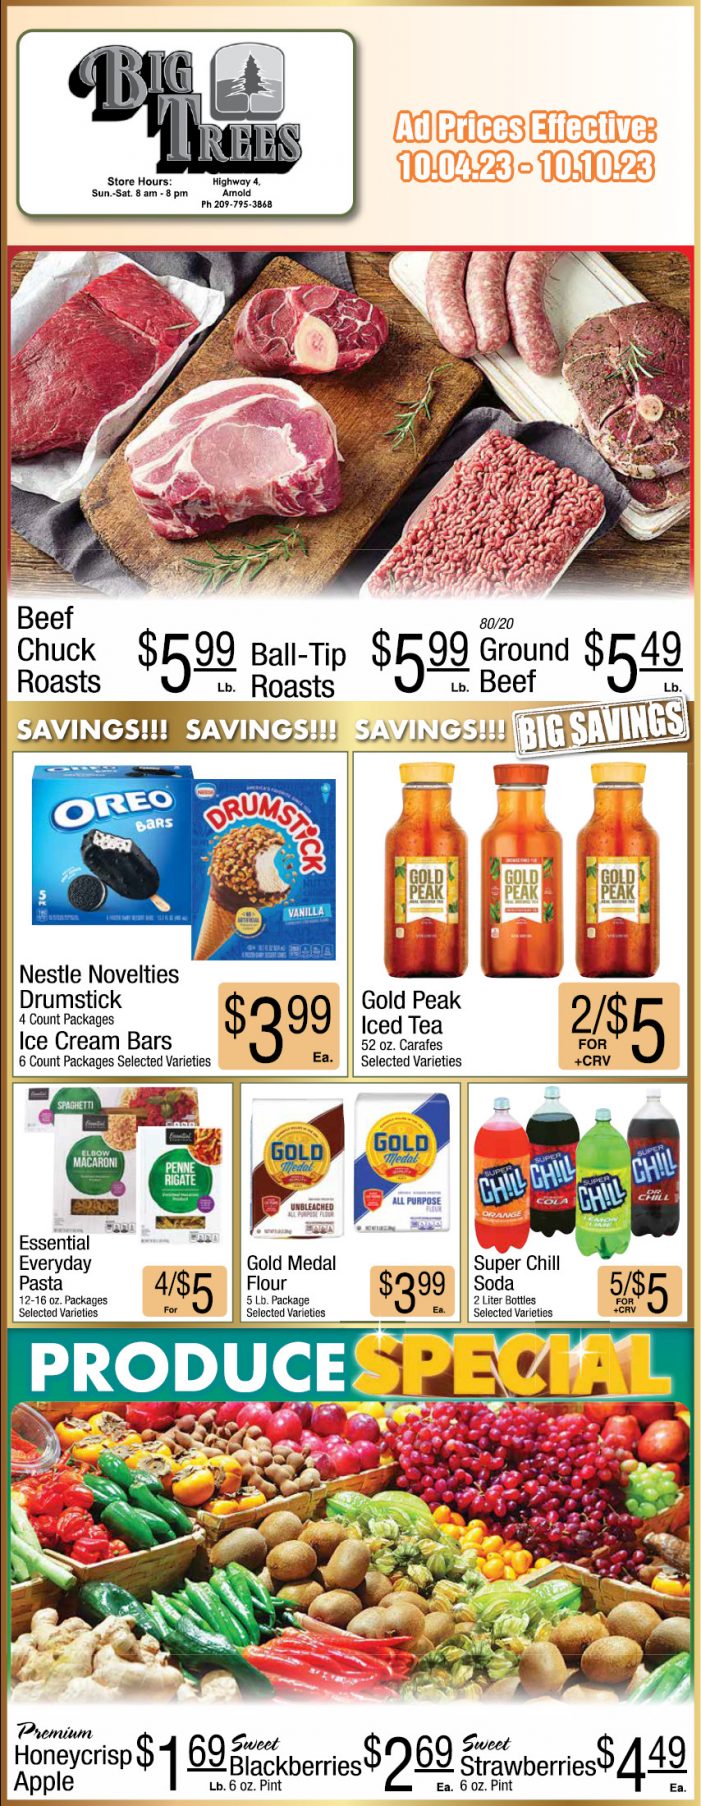 Big Trees Market Weekly Ad, Grocery, Produce, Meat & Deli Specials Through October 10th!  Shop Local & Save!